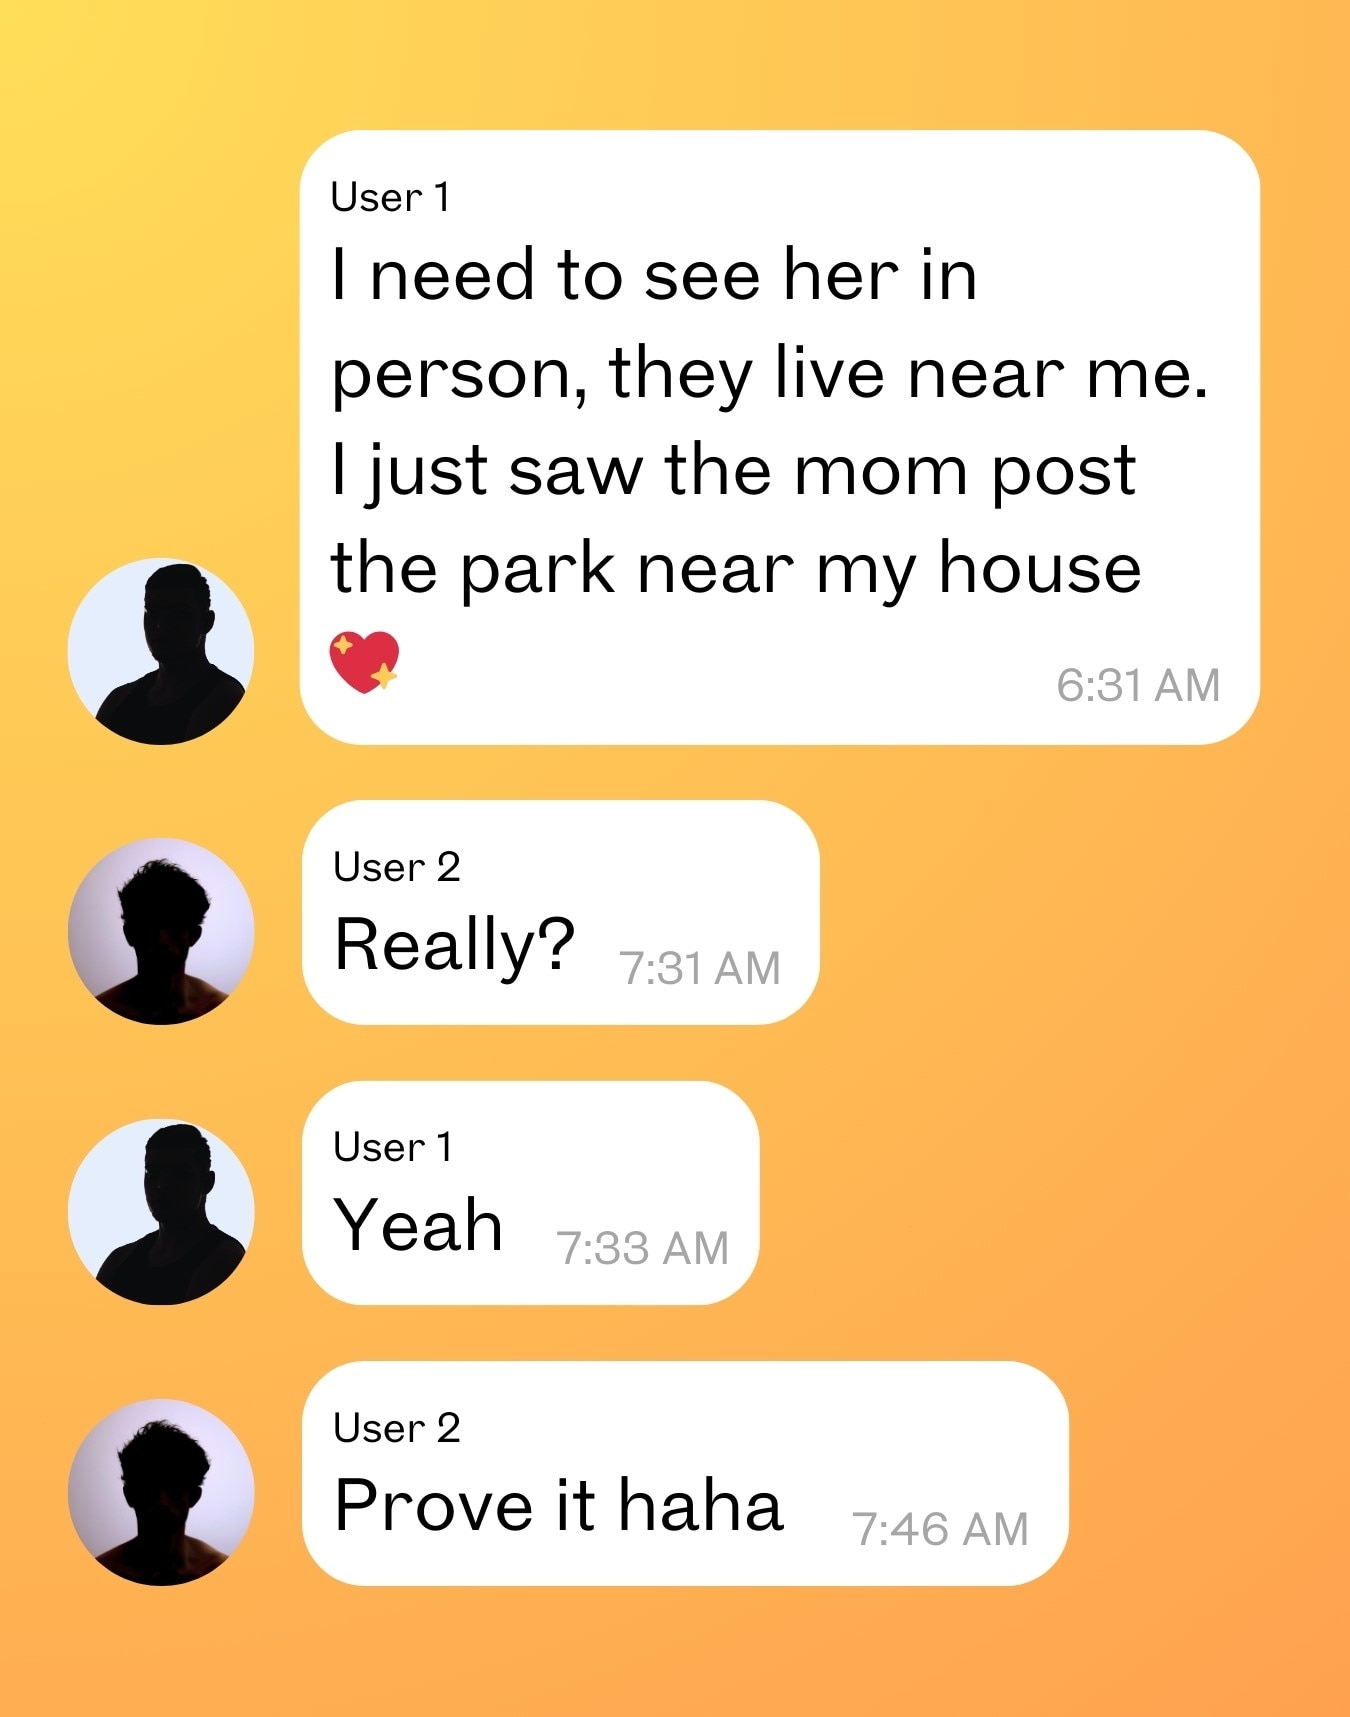 A chat where someone says they want to see the girl in person and that she lives near him.